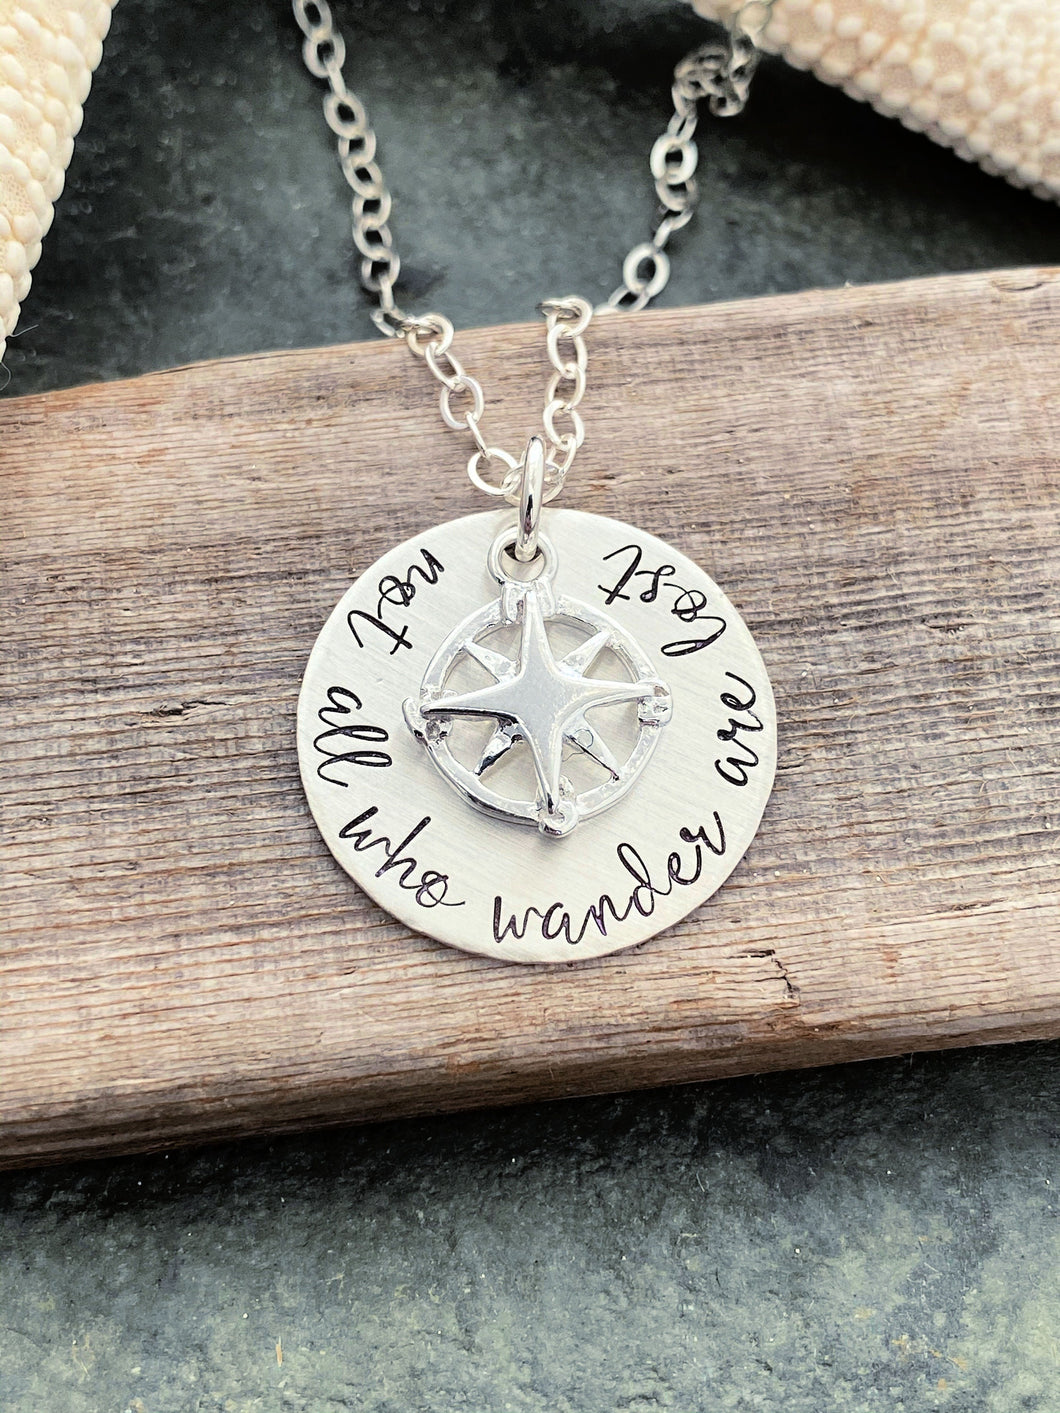 not all who wander are lost, sterling silver necklace with sterling silver compass charm and chain, hand stamped , gift idea for her